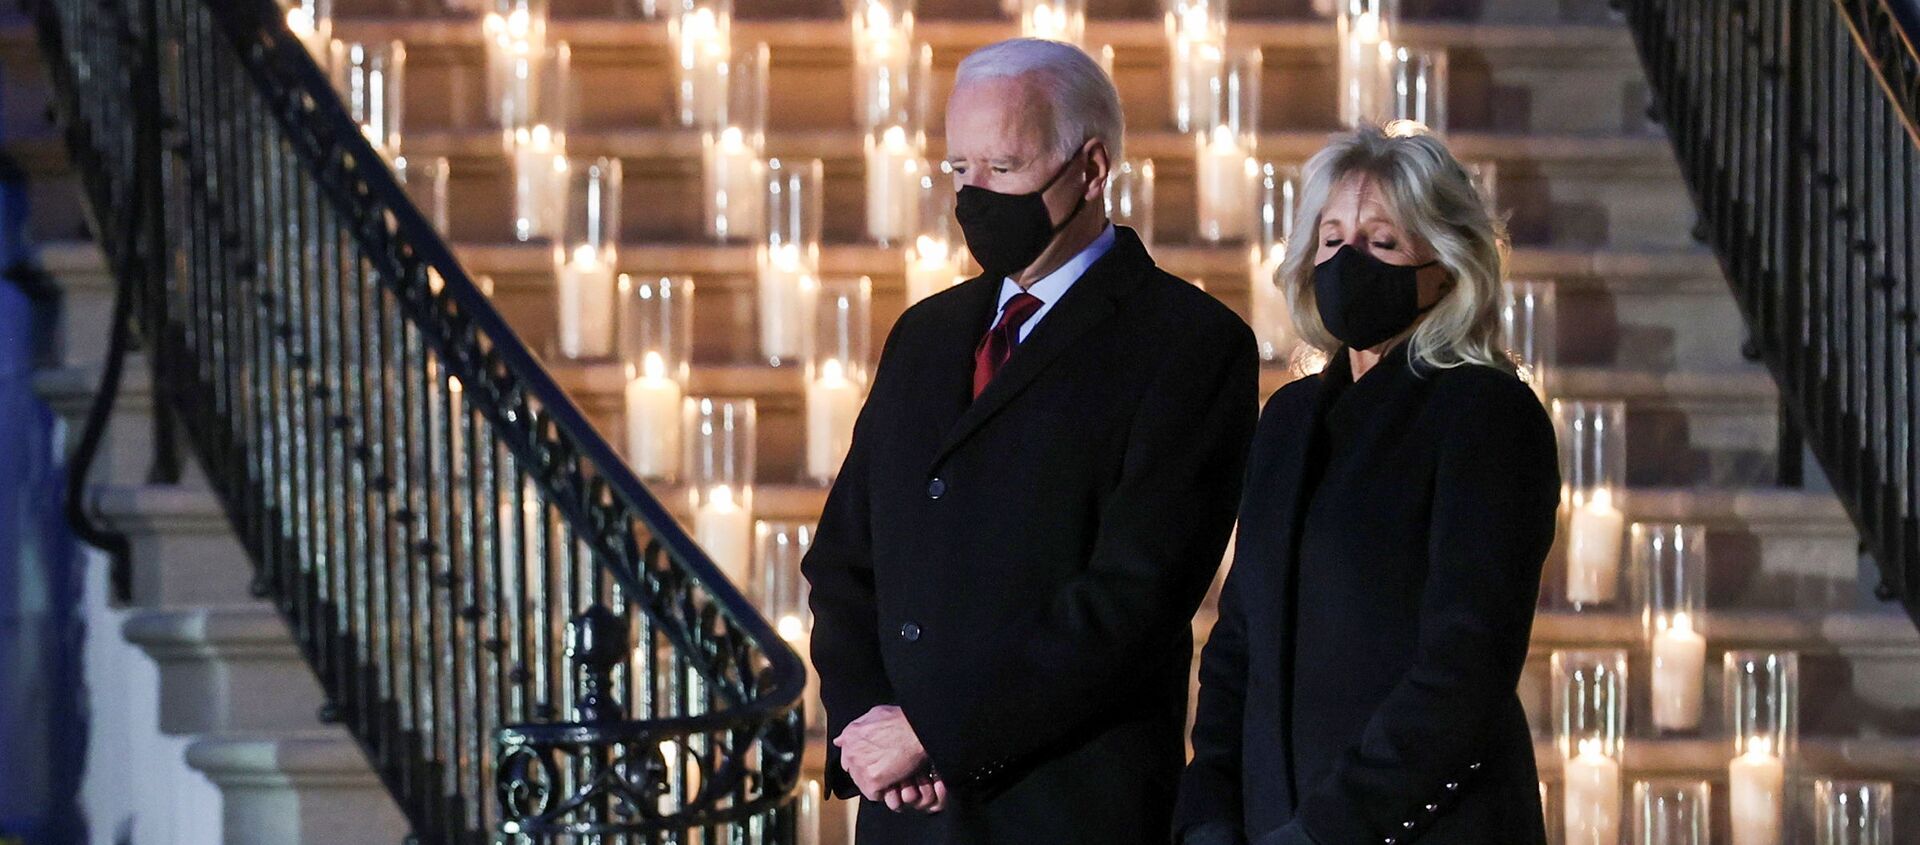 U.S. President Joe Biden and his wife Jill Biden attend a moment of silence and candle lighting ceremony to commemorate the grim milestone of 500,000 U.S. deaths from the coronavirus disease (COVID-19) at the White House in Washington, U.S., February 22, 2021.  - Sputnik International, 1920, 23.02.2021